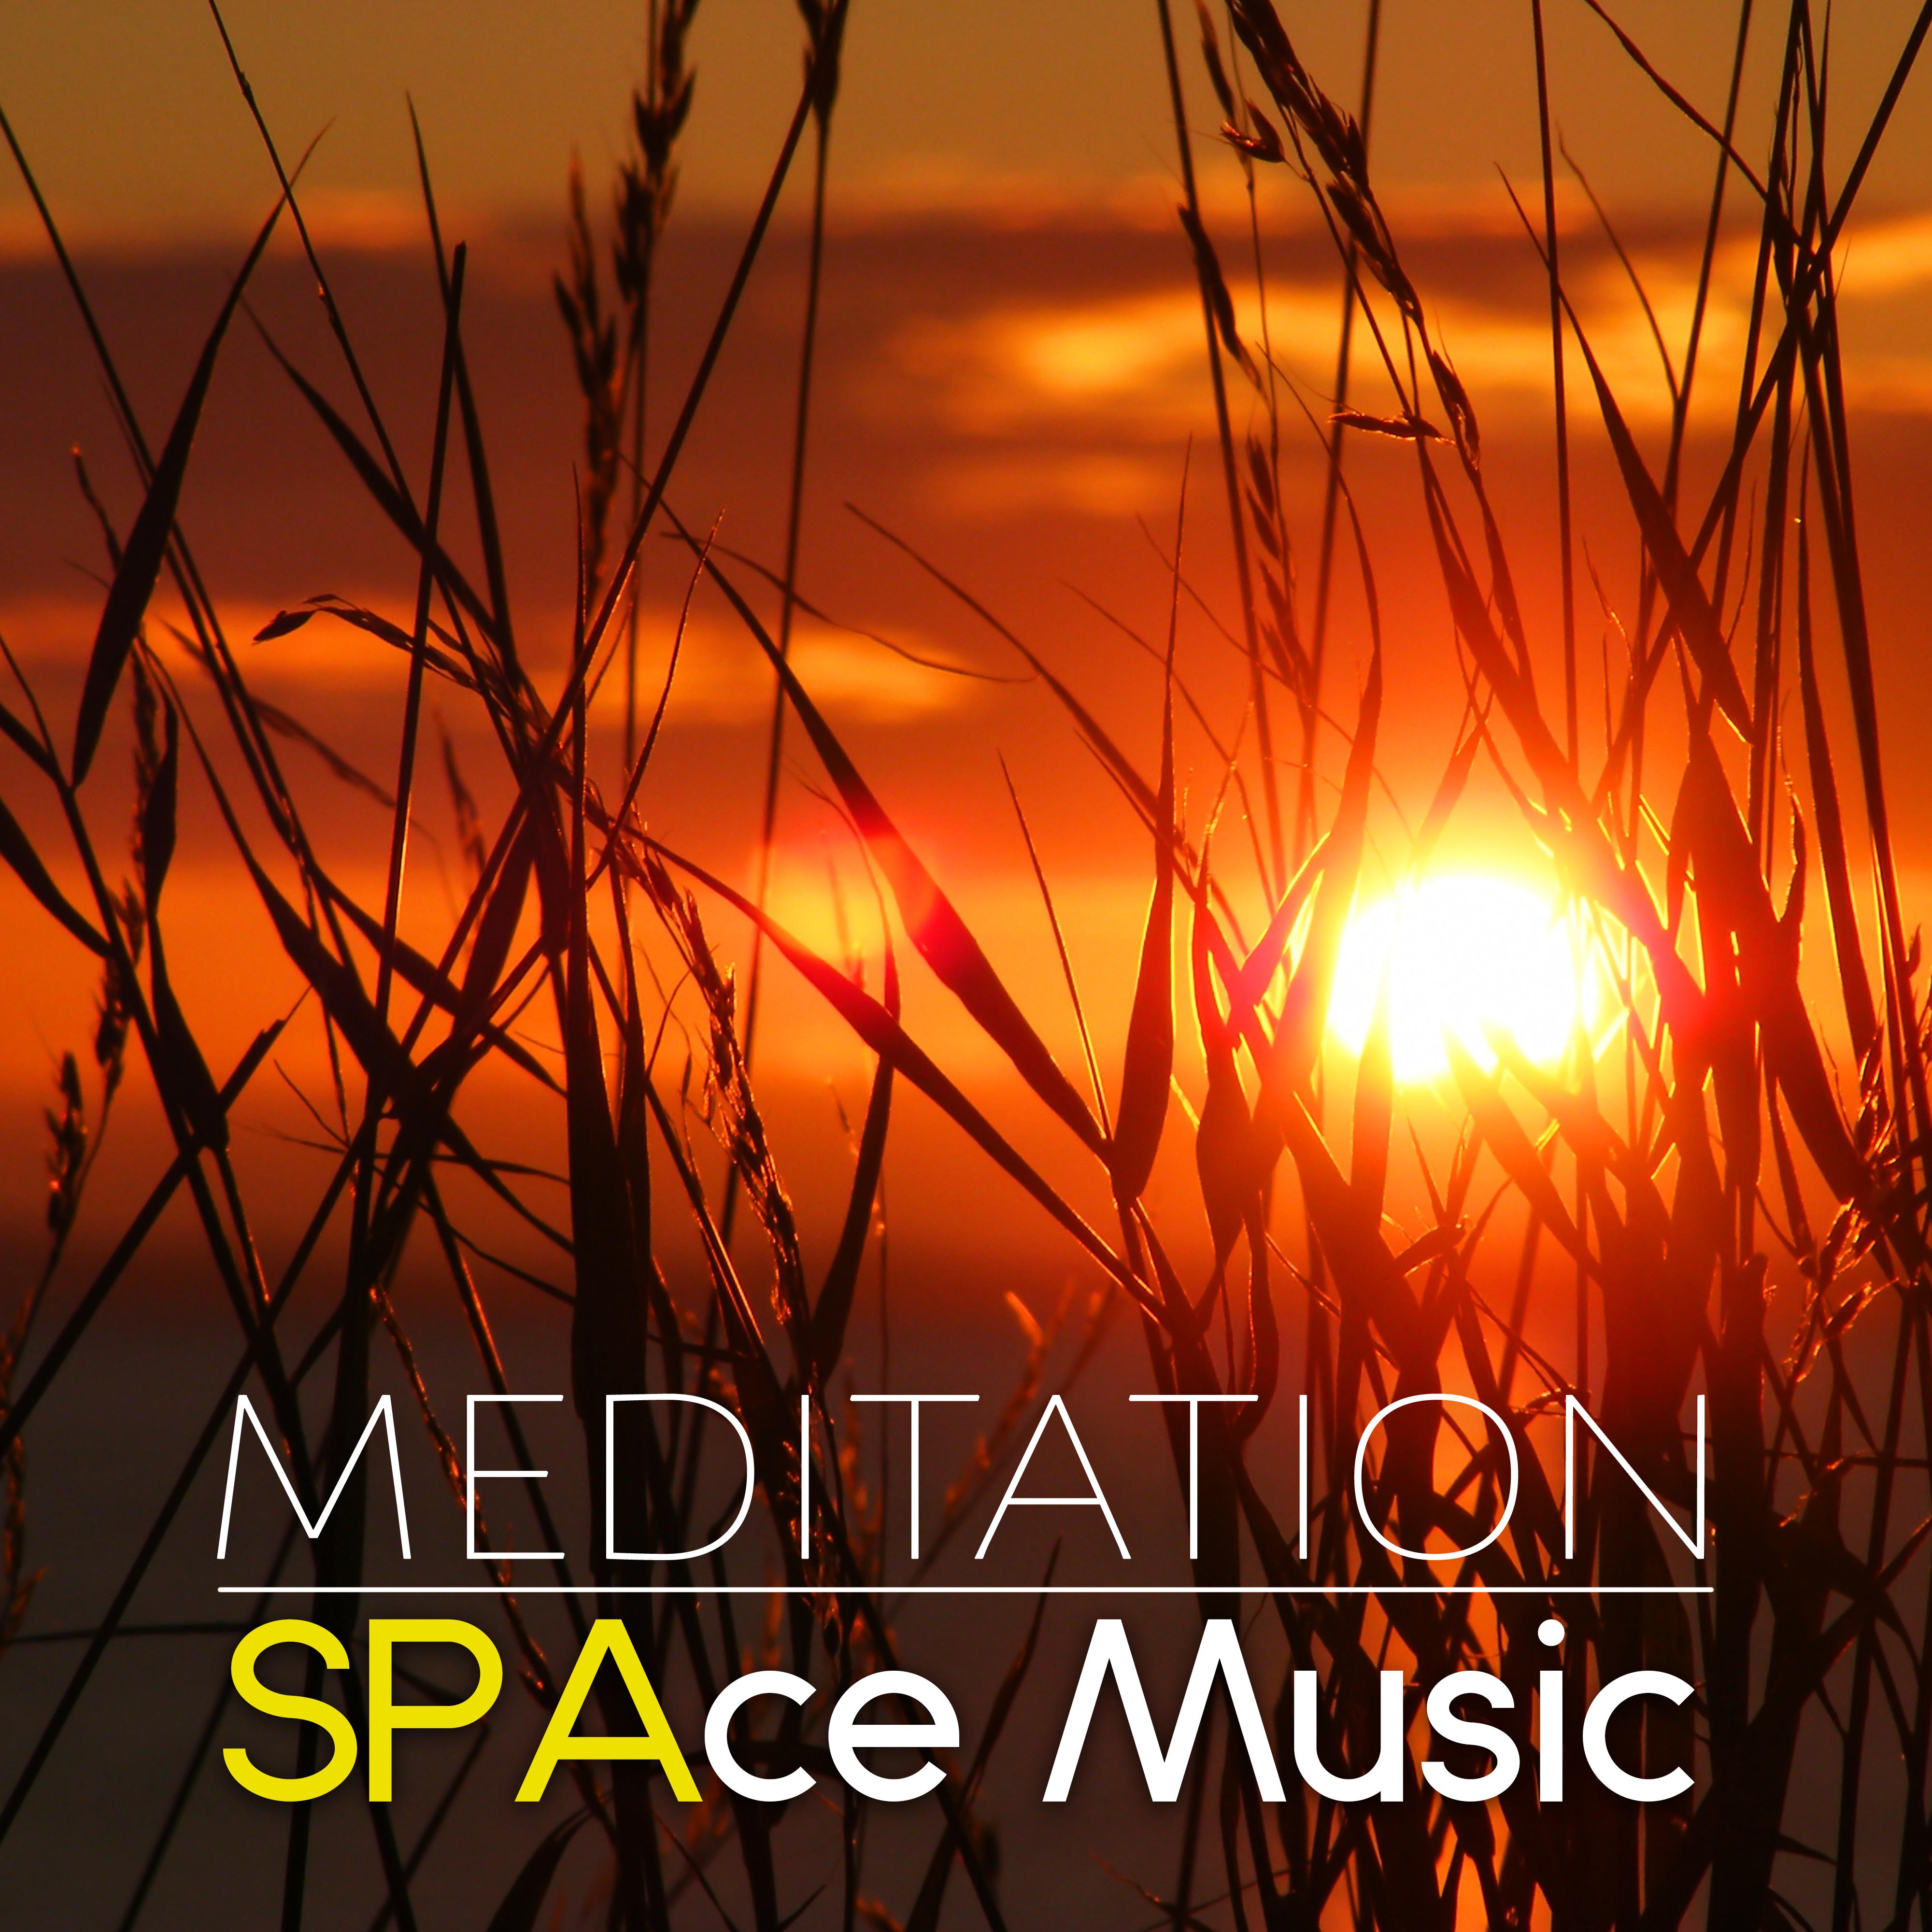 Meditation: SPAce Music – Tranquility Sounds, Zen Music, Relaxing Tracks, Well Being, Spa Sounds, Anti Stress, Yoga Music